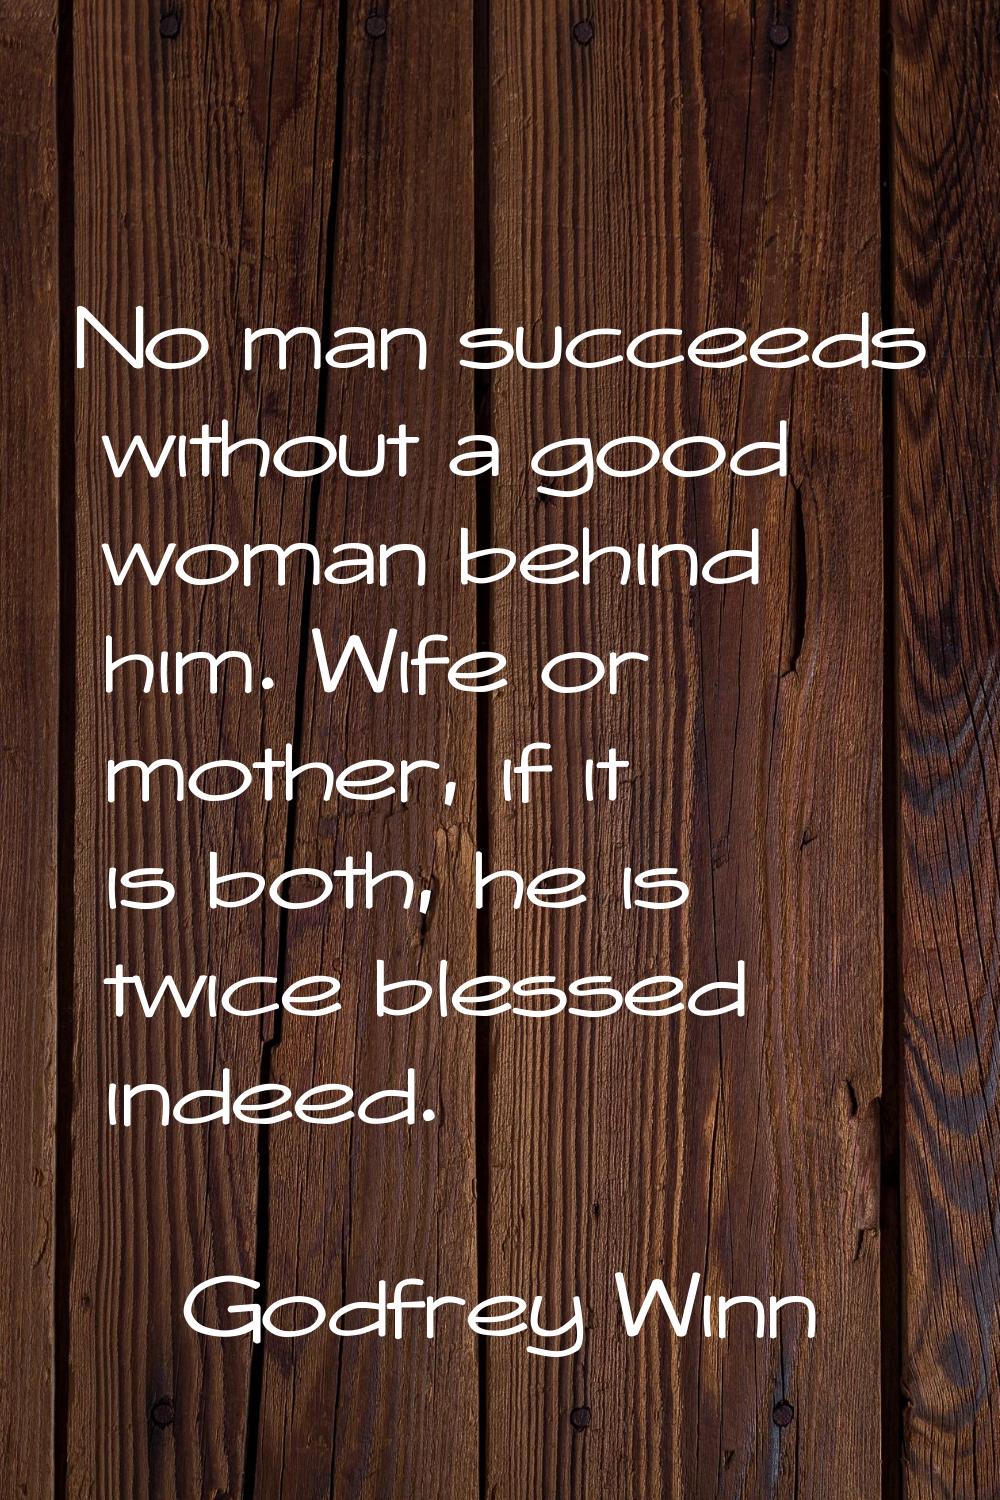 No man succeeds without a good woman behind him. Wife or mother, if it is both, he is twice blessed